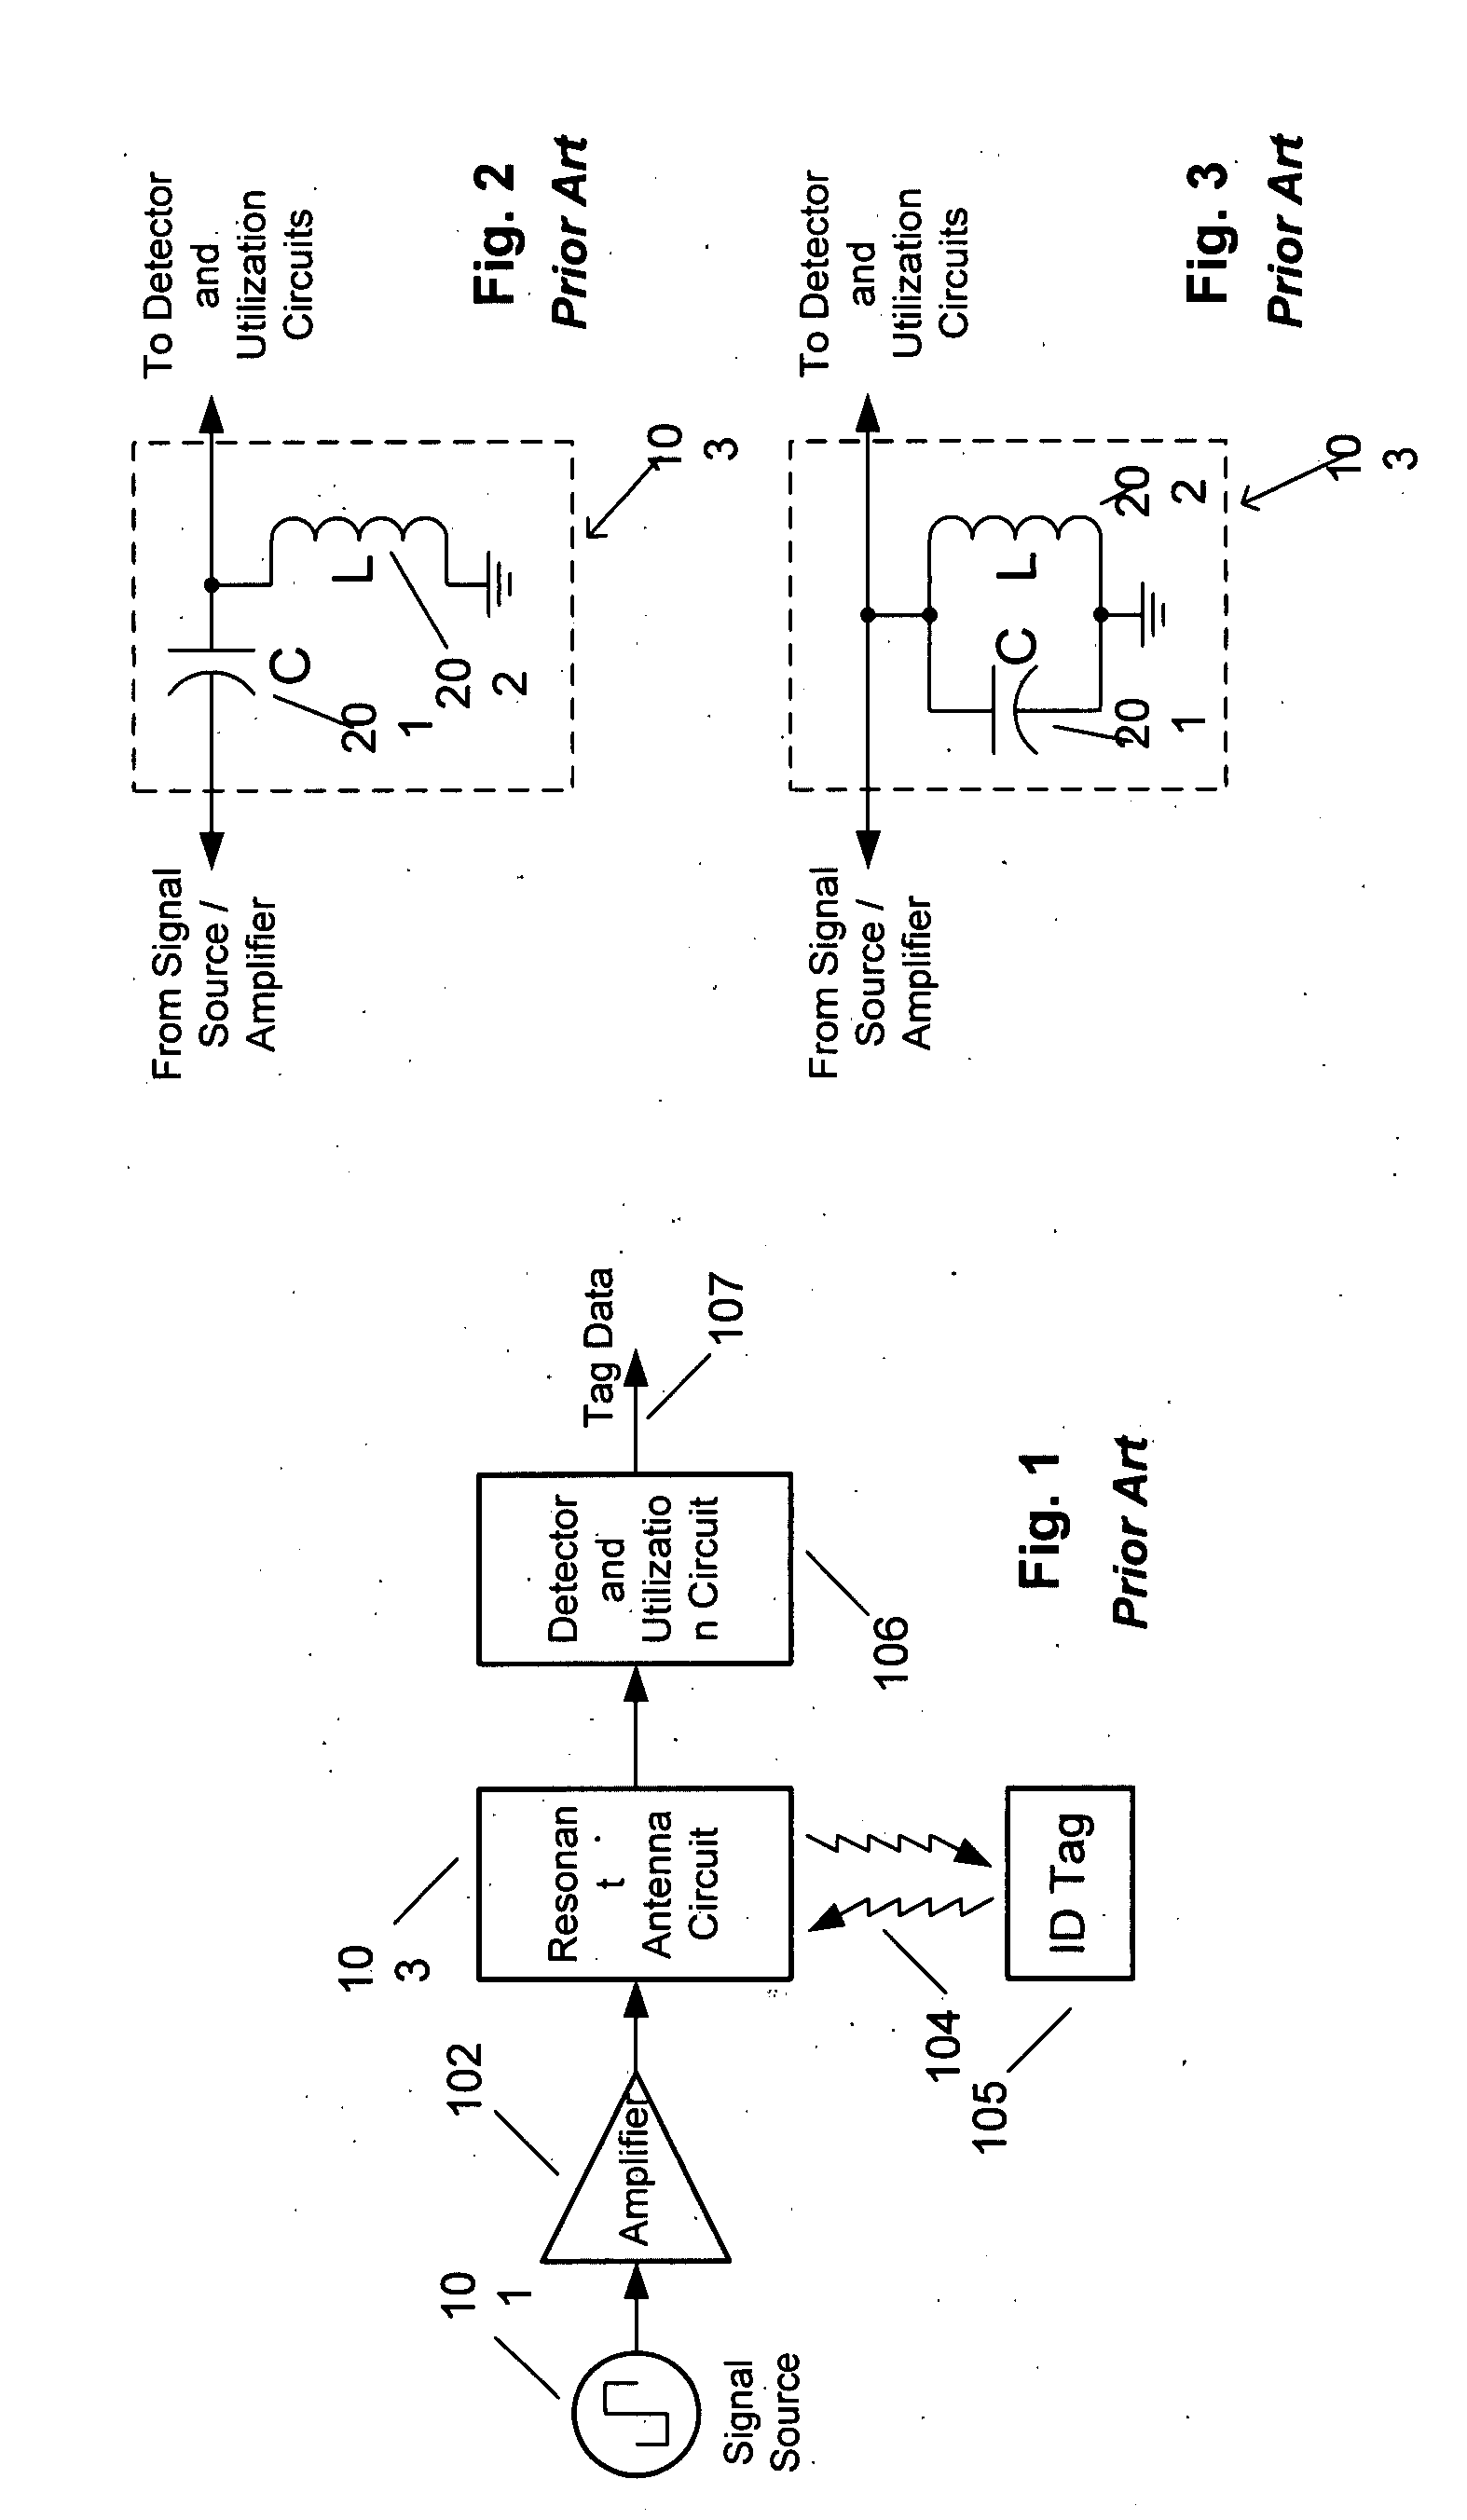 Inductively coupled extension antenna for a radio frequency identification reader